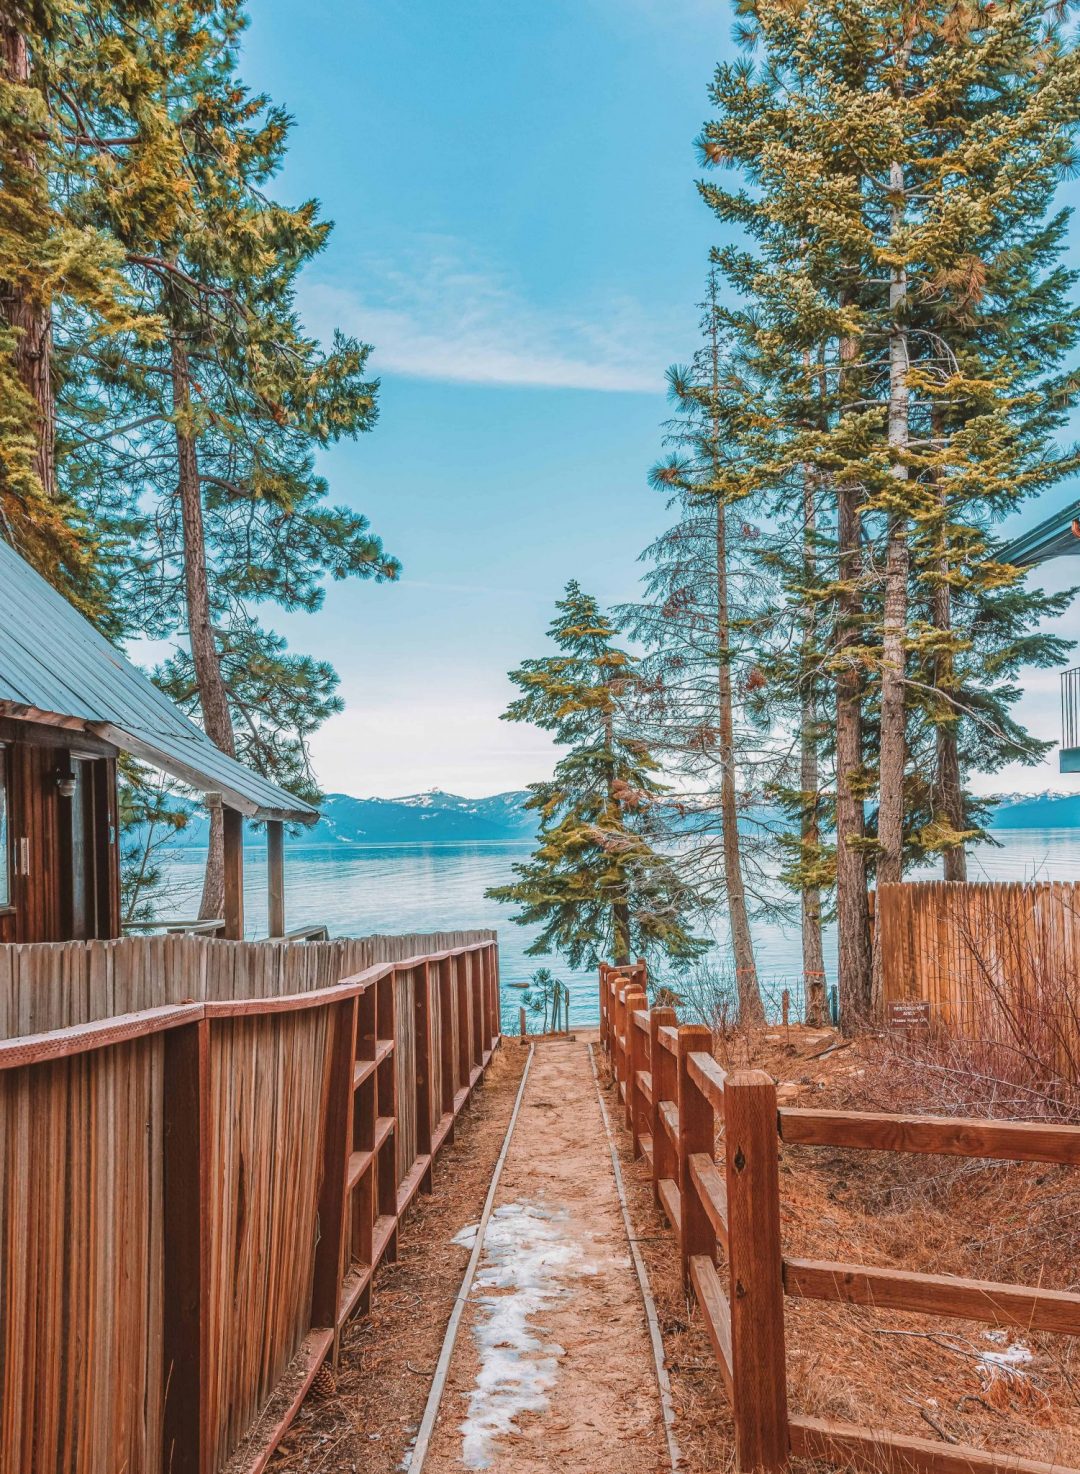 50 Best Things to Do in Lake Tahoe (For Every Season)